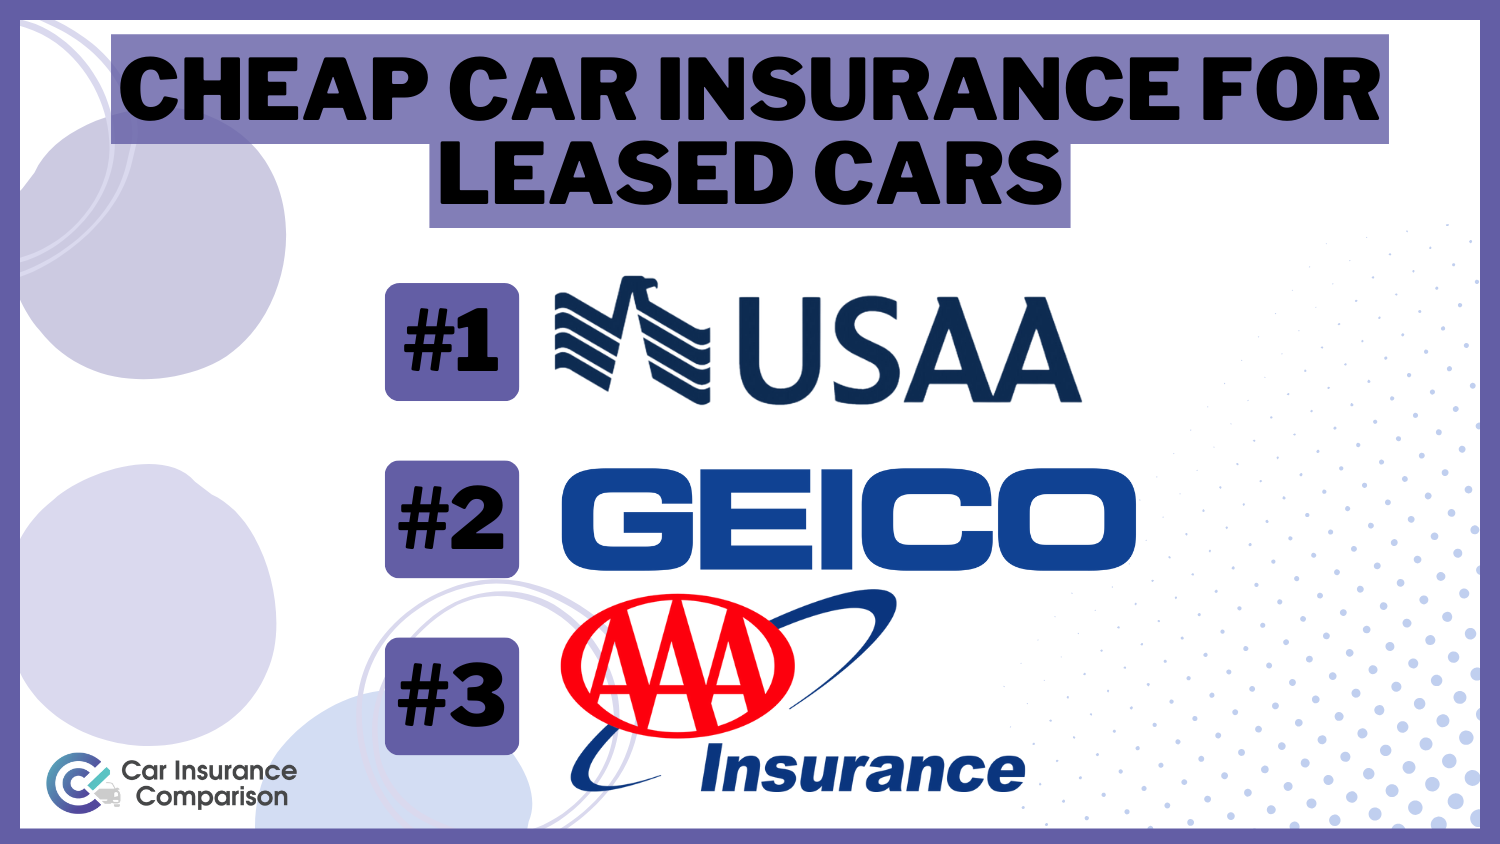 Cheap Car Insurance for Leased Cars: USAA, Geico, and AAA